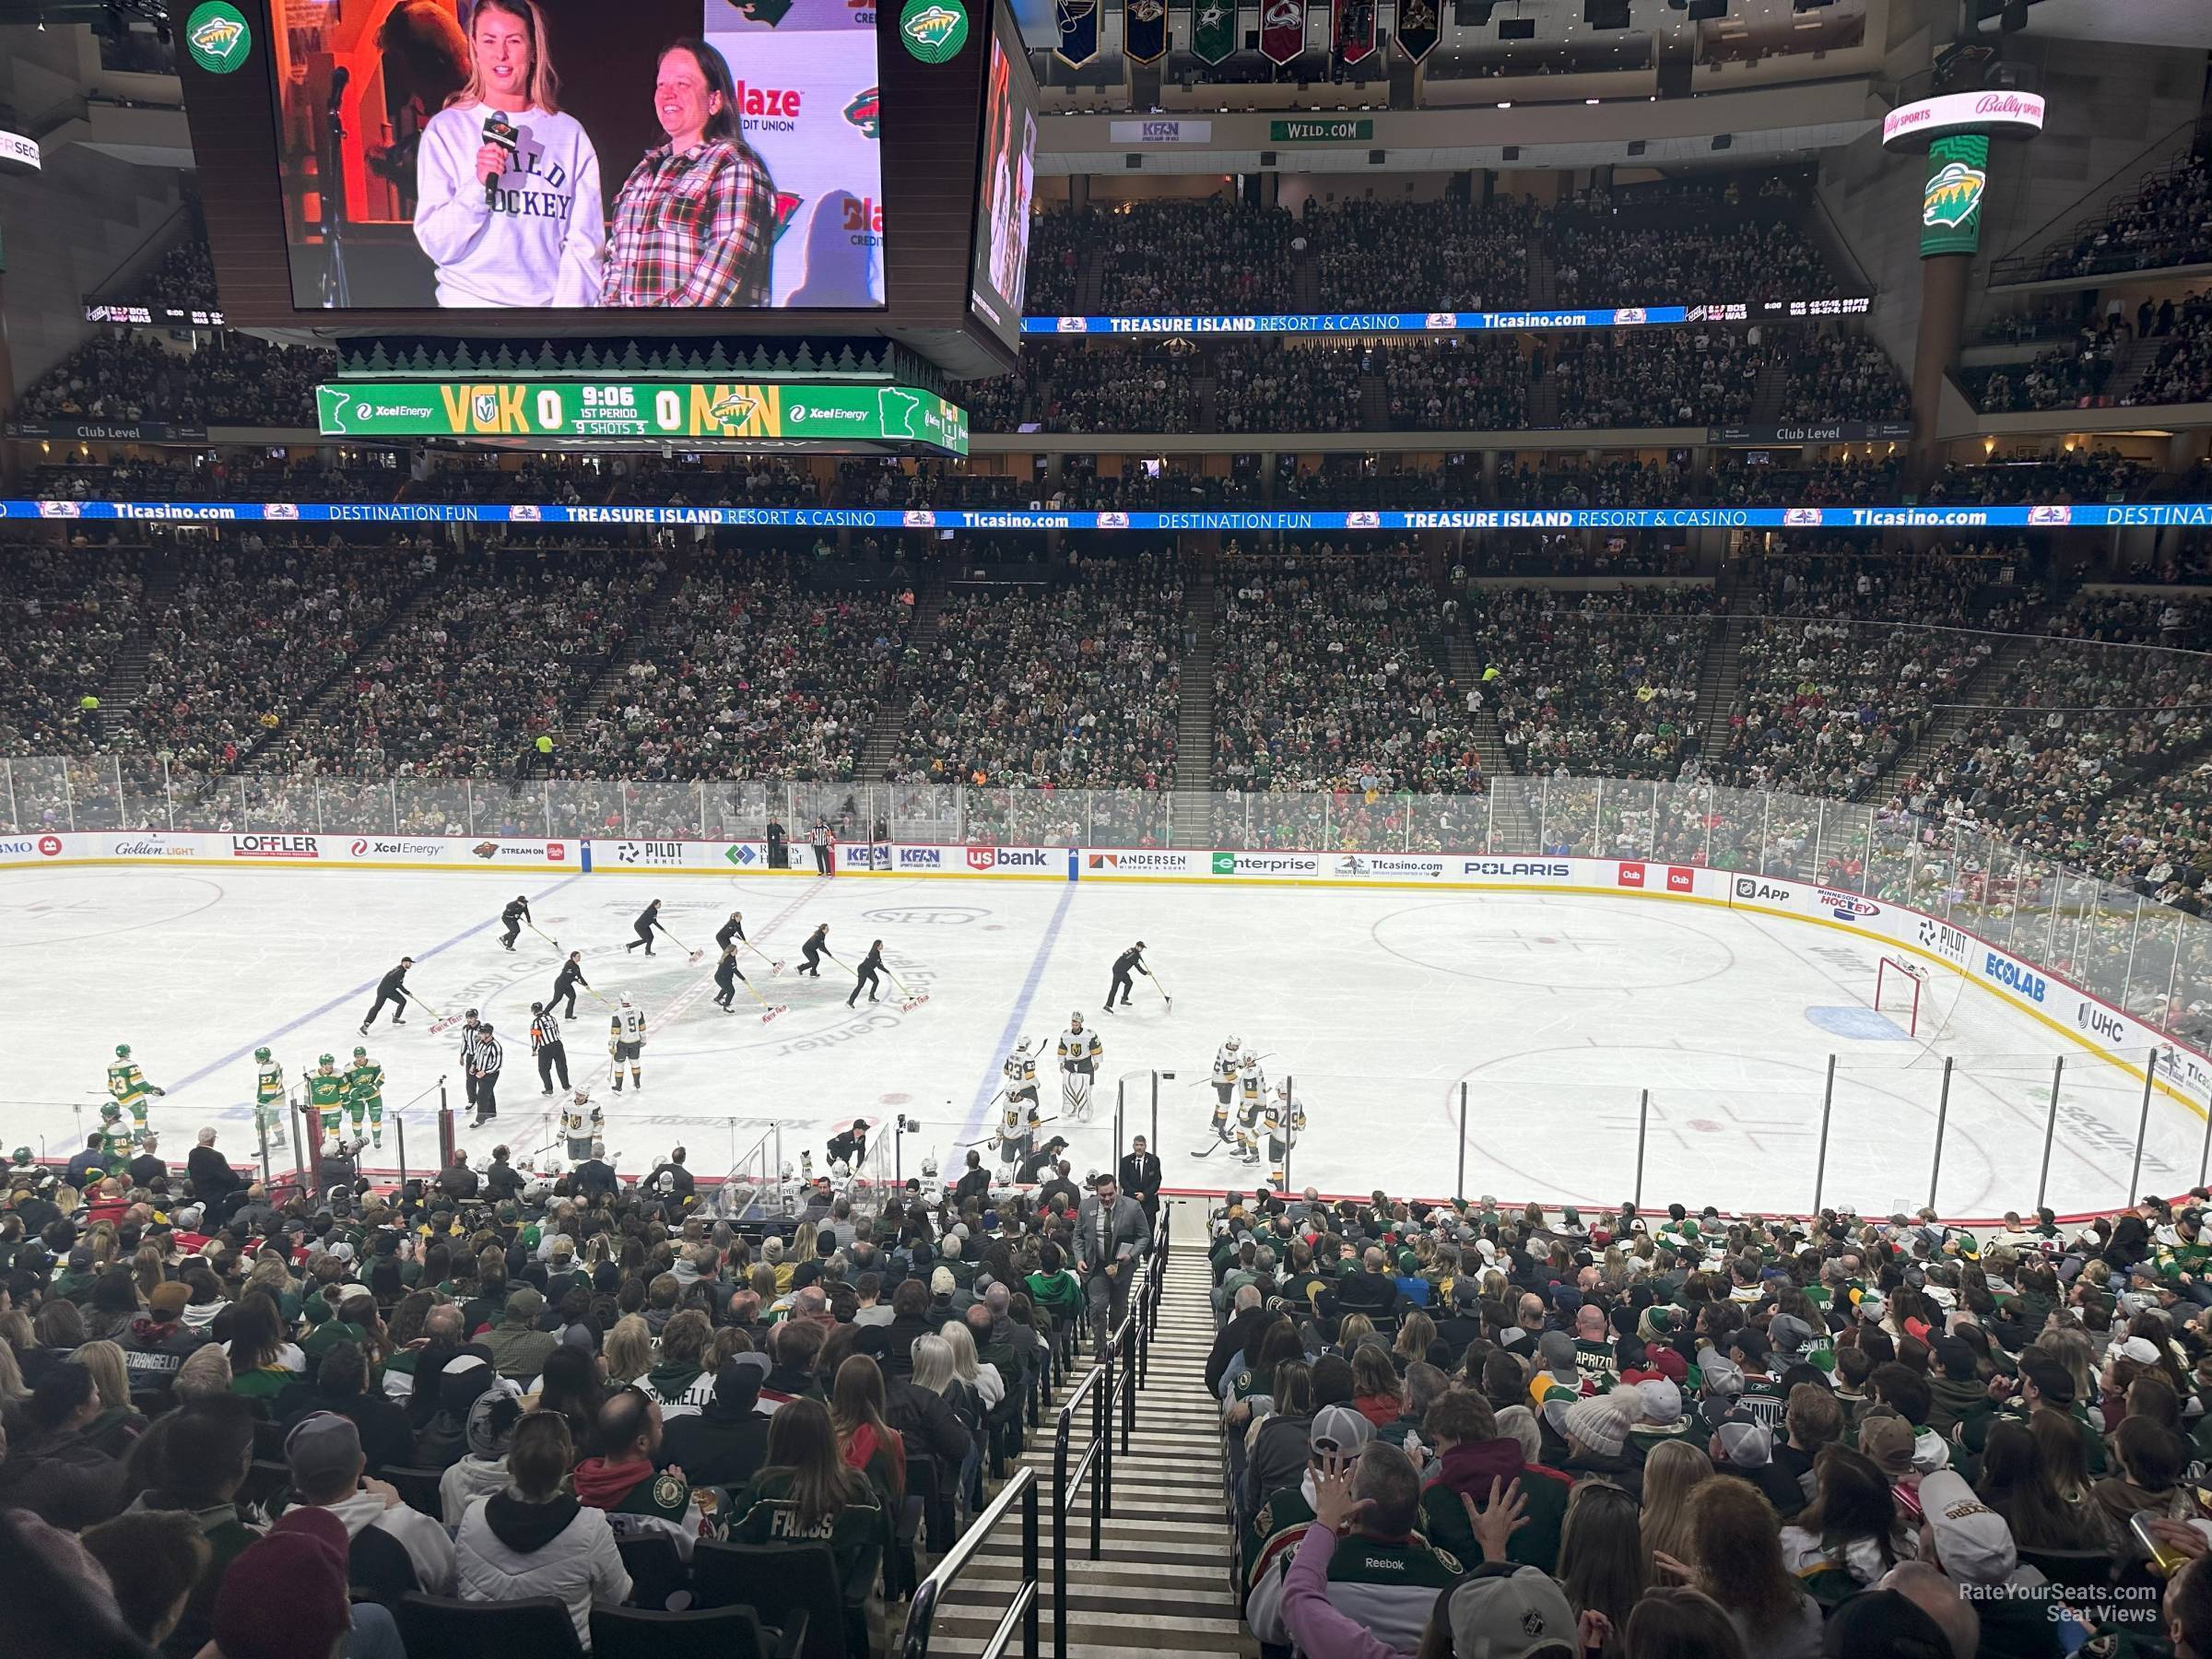 section 115, row 26 seat view  for hockey - xcel energy center